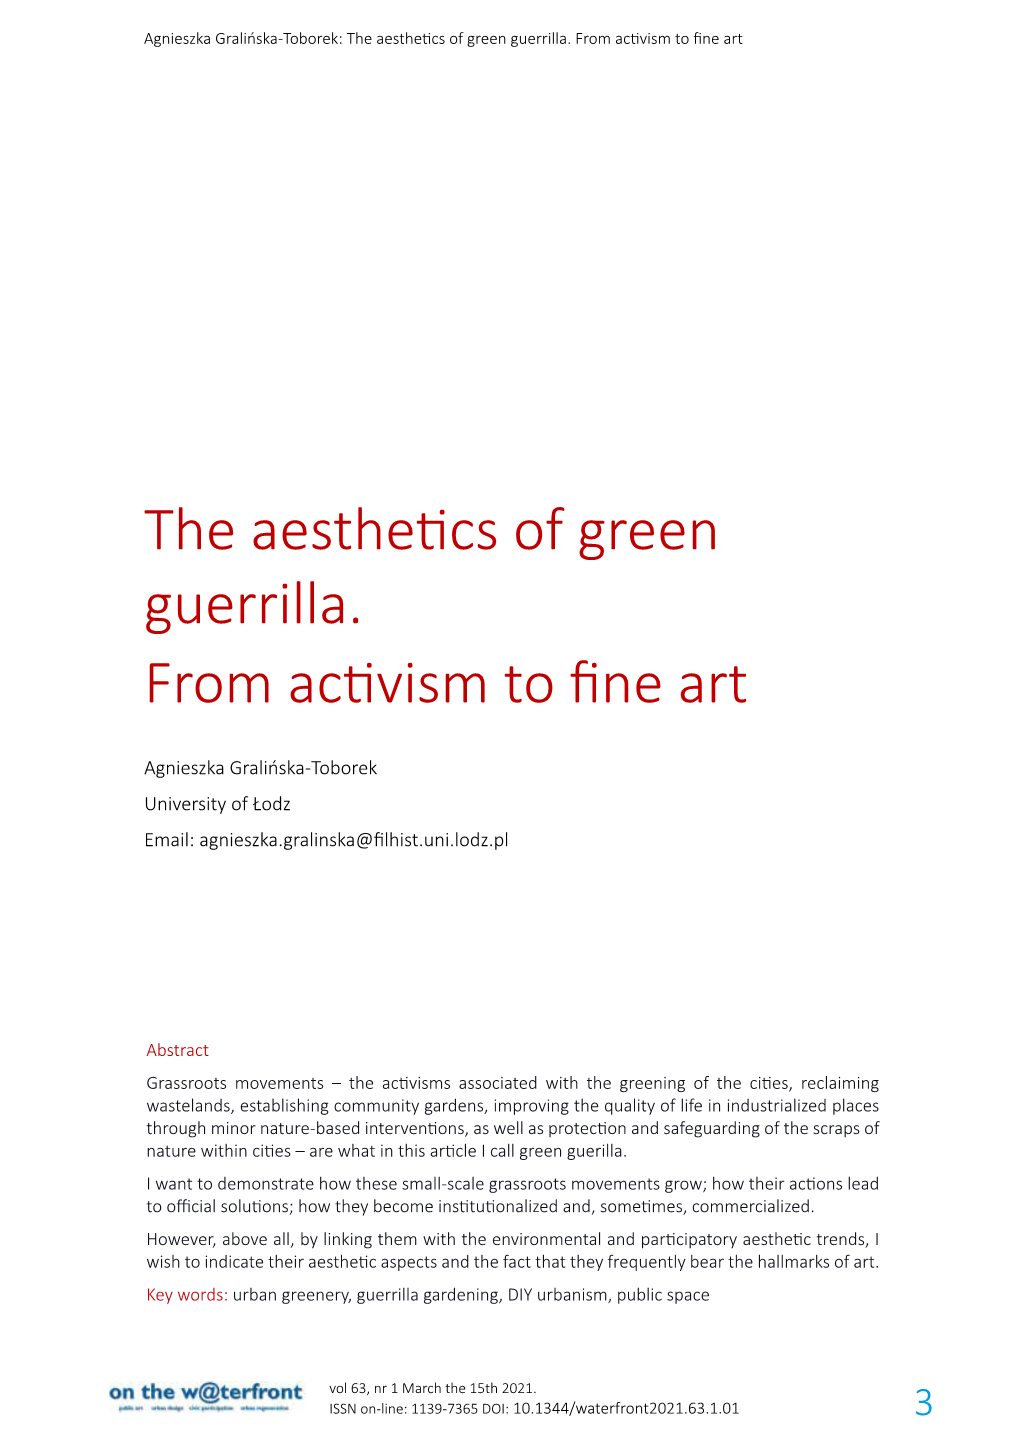 The Aesthetics of Green Guerrilla. from Activism to Fine Art